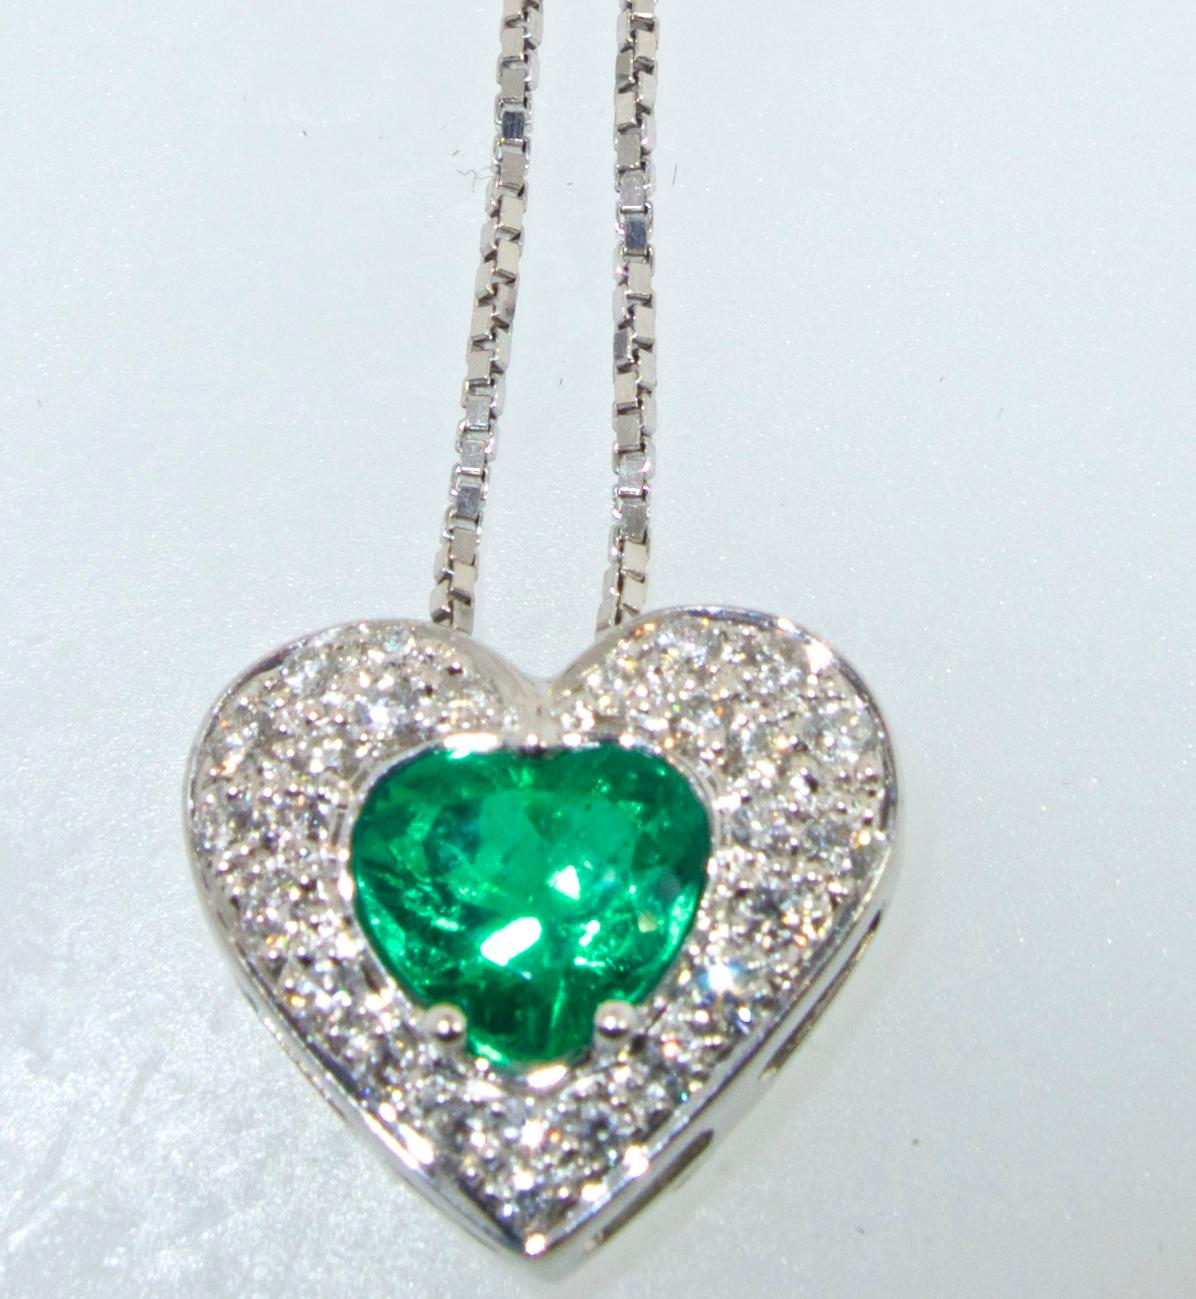 The heart shaped center natural Emerald is a bright lively green which is surrounded by fine white diamonds.  The Emerald weighs approximately .85 cts., and the fine white diamonds (H,VS1), weighs approximately .33 cts.  The 18K white gold pendant